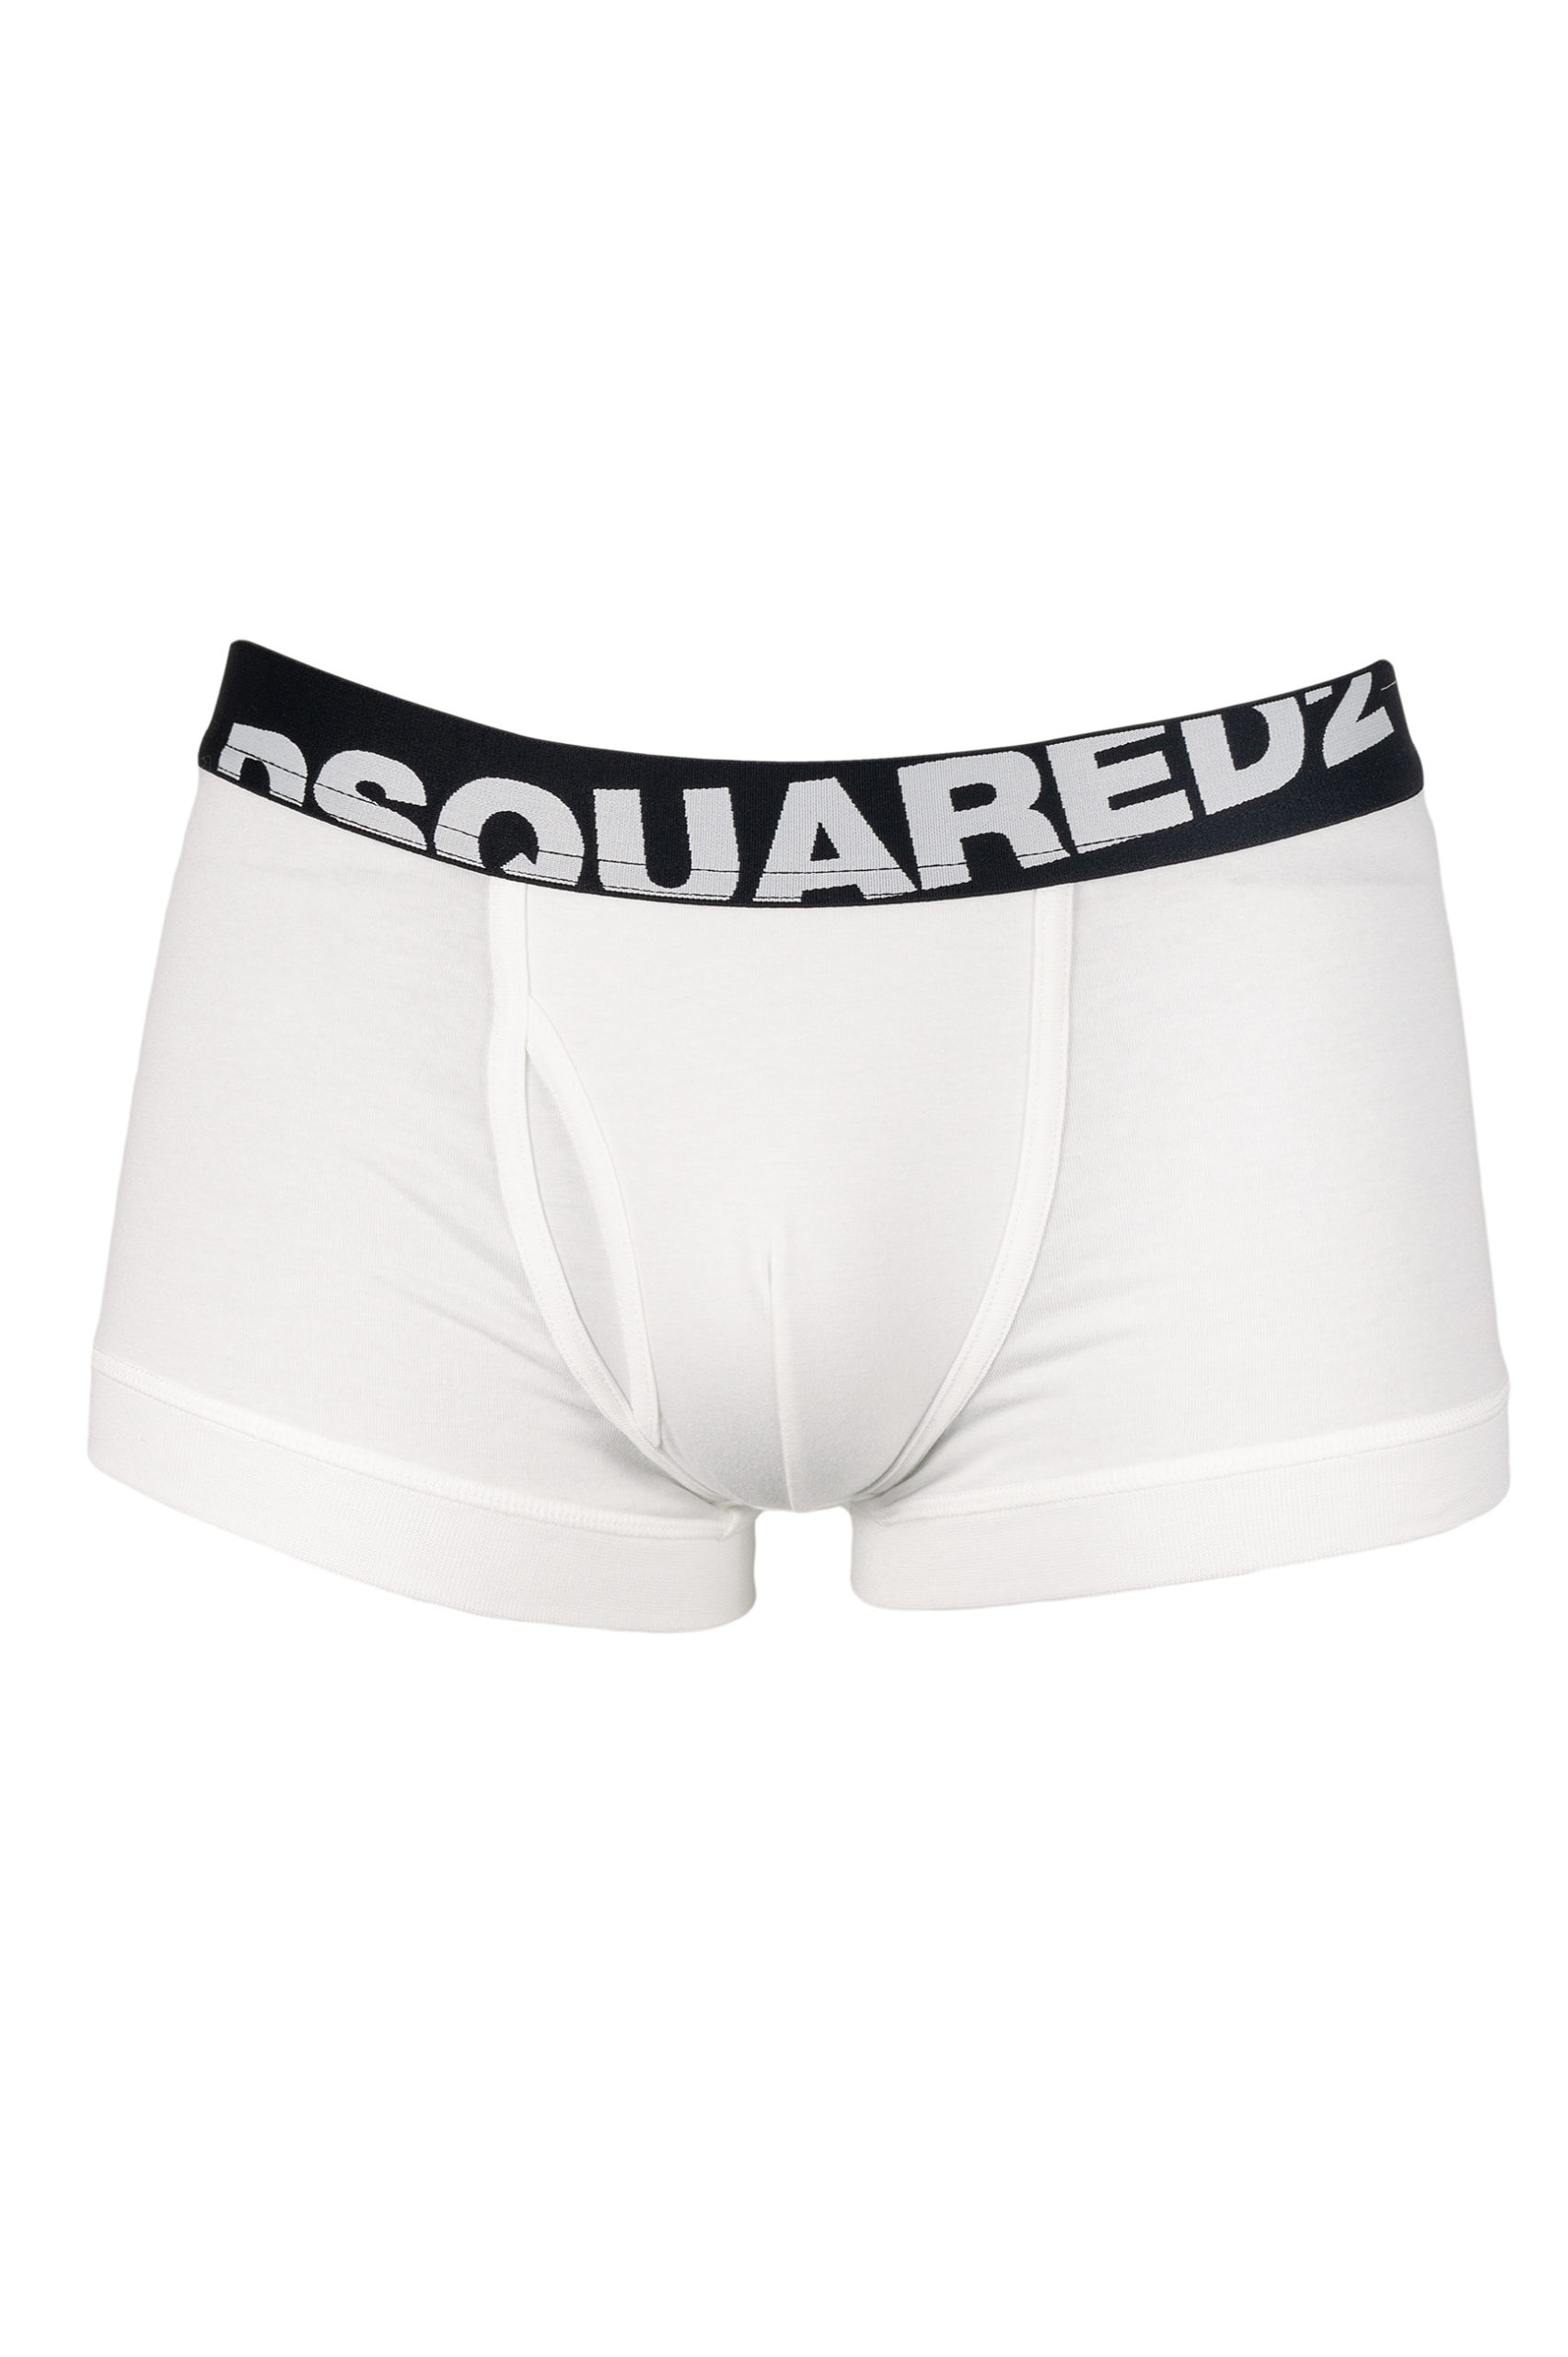 DSQUARED2 - TWIN PACK BOXER - 0030 | Baccus